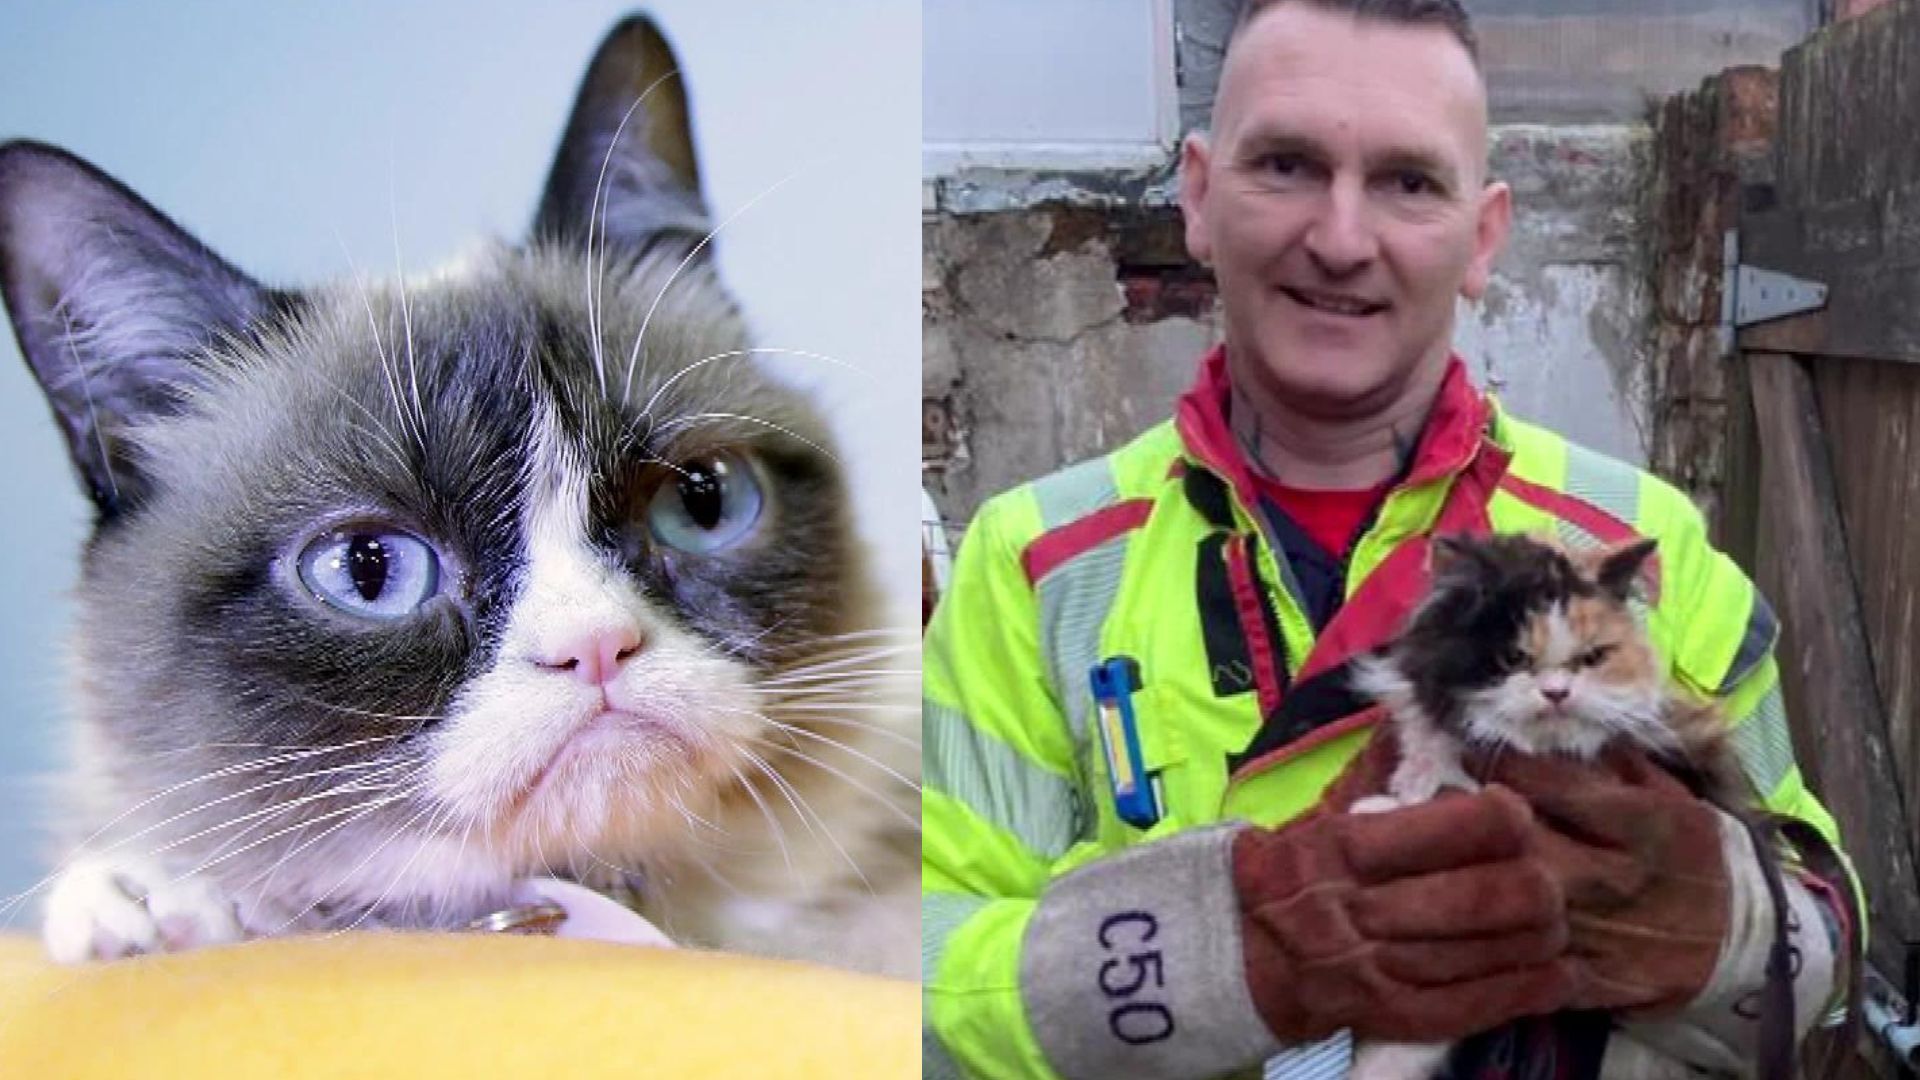 We may have just found the NEW grumpy cat